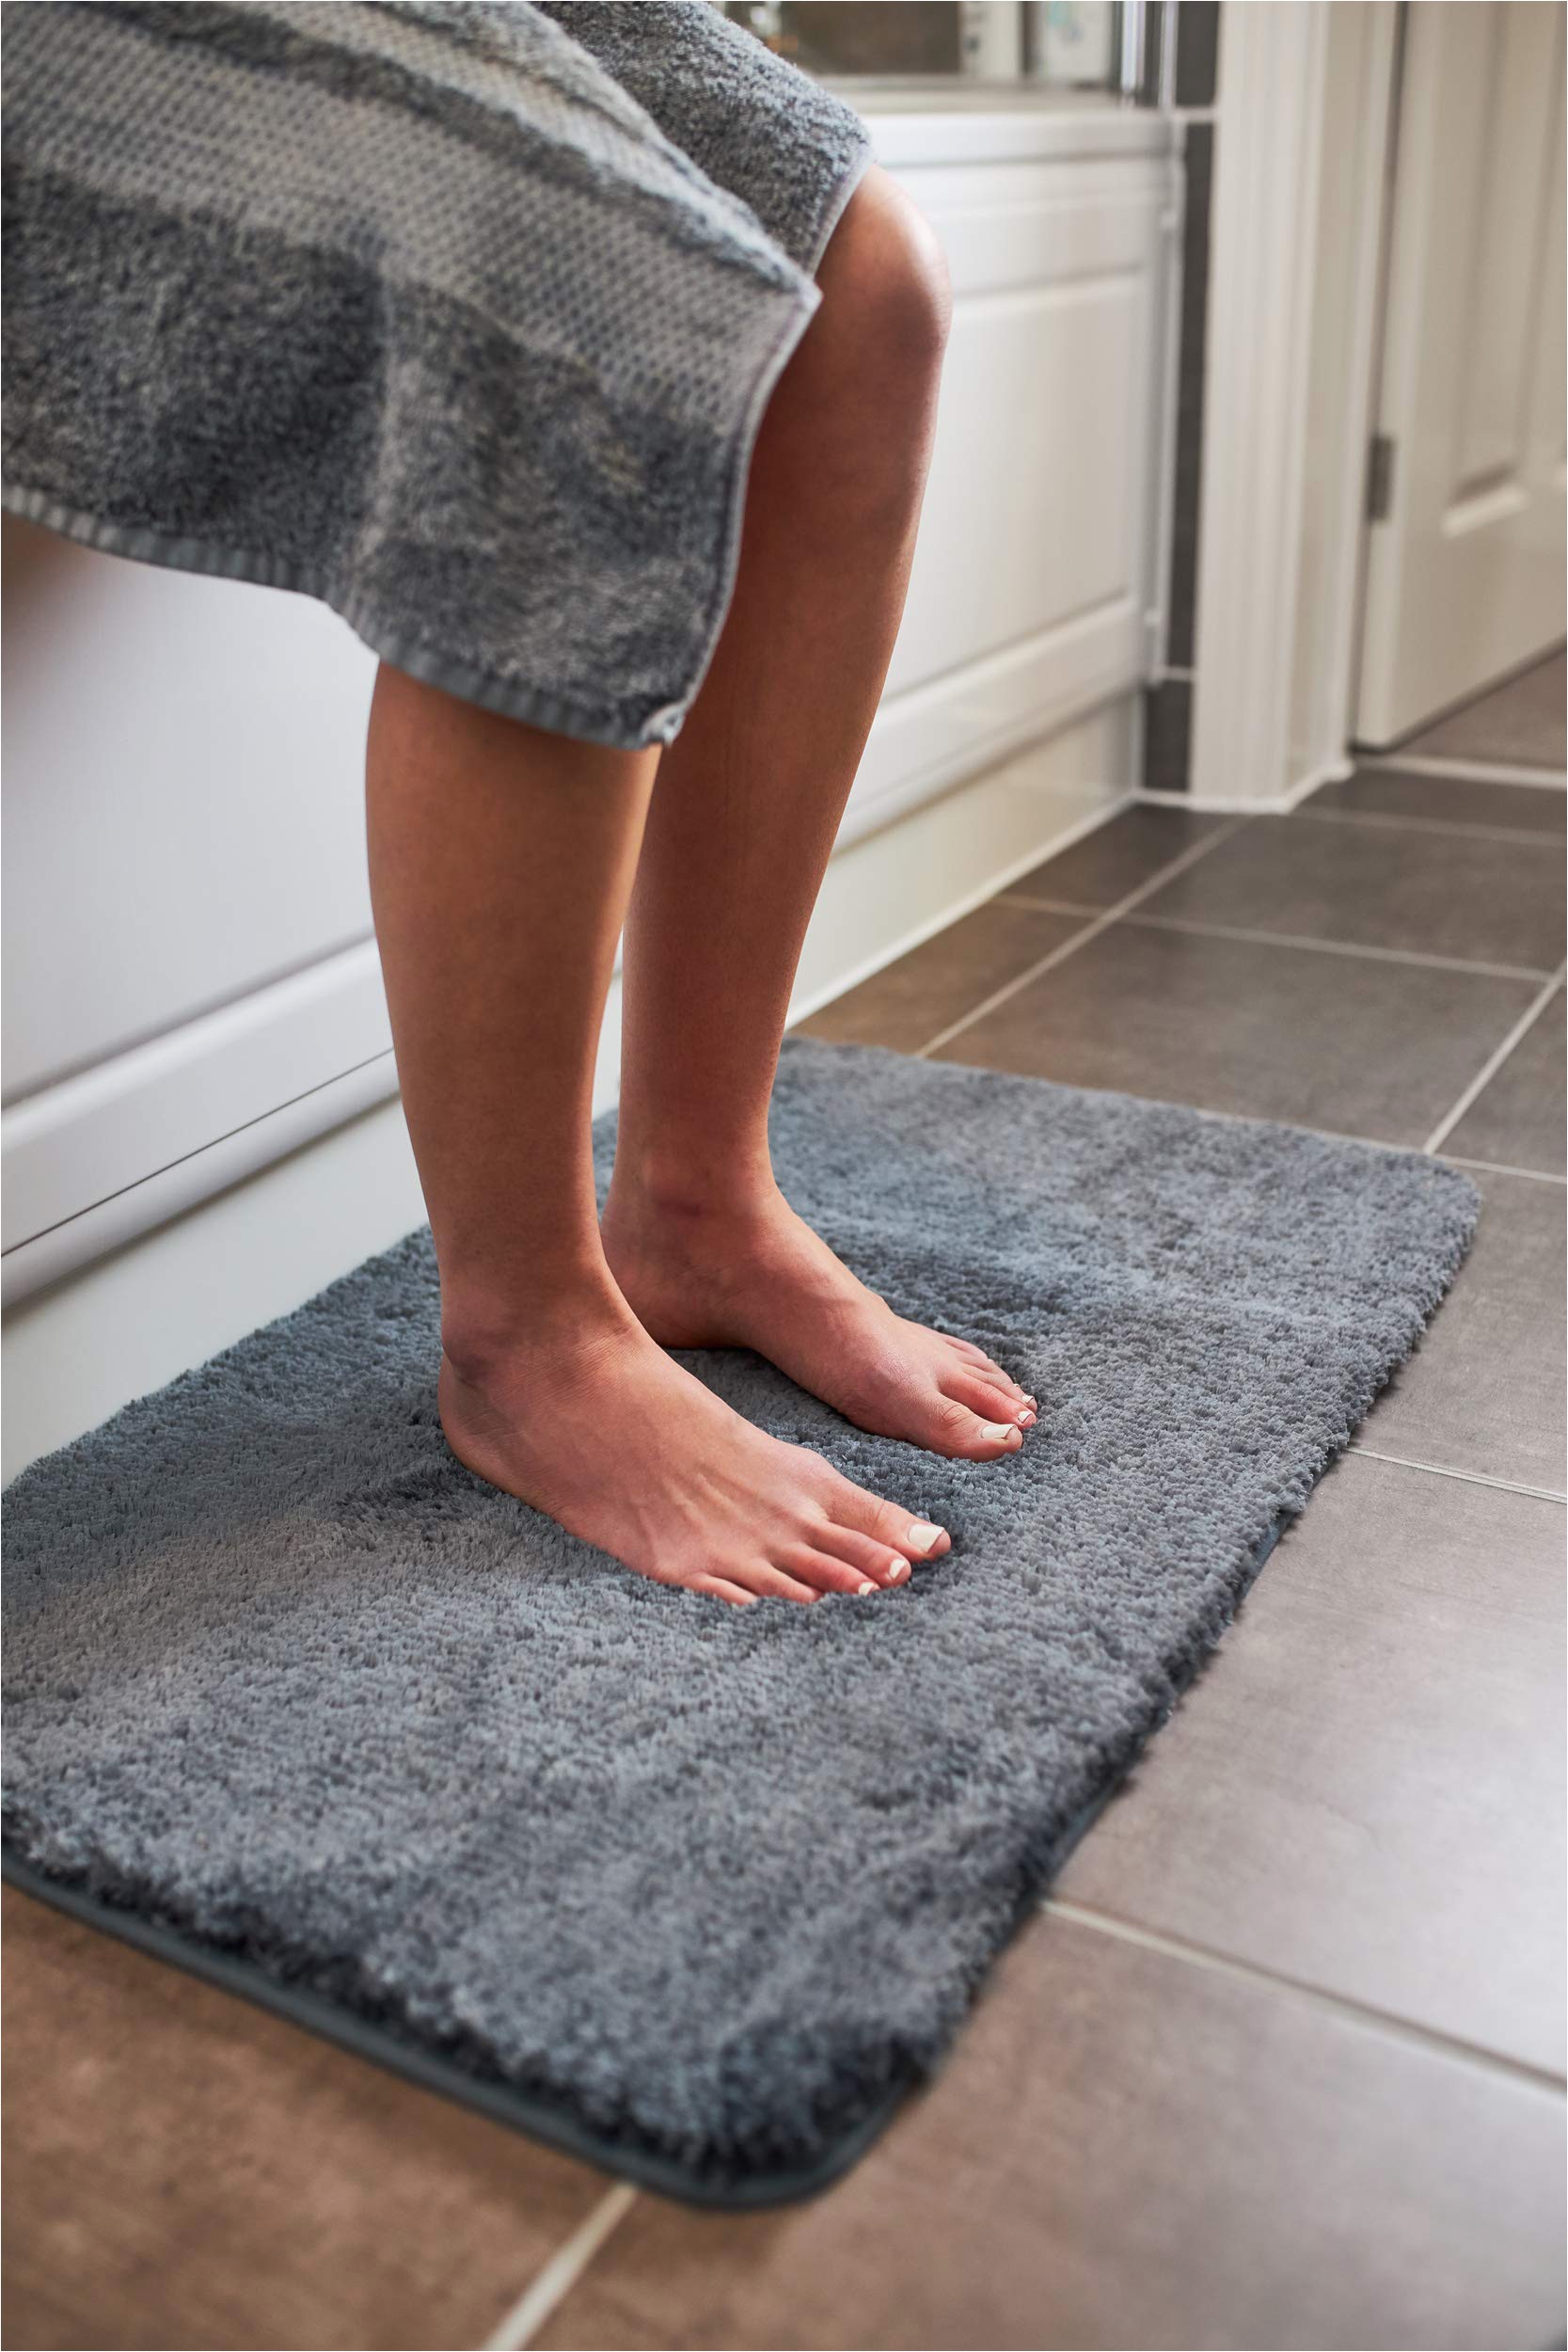 Luxury Bathroom Rugs and Mats Luxury Grey Bath Mat Microfiber Non Slip Bath Rug with Super soft Absorbent Dry Fast Design for Bath and Shower